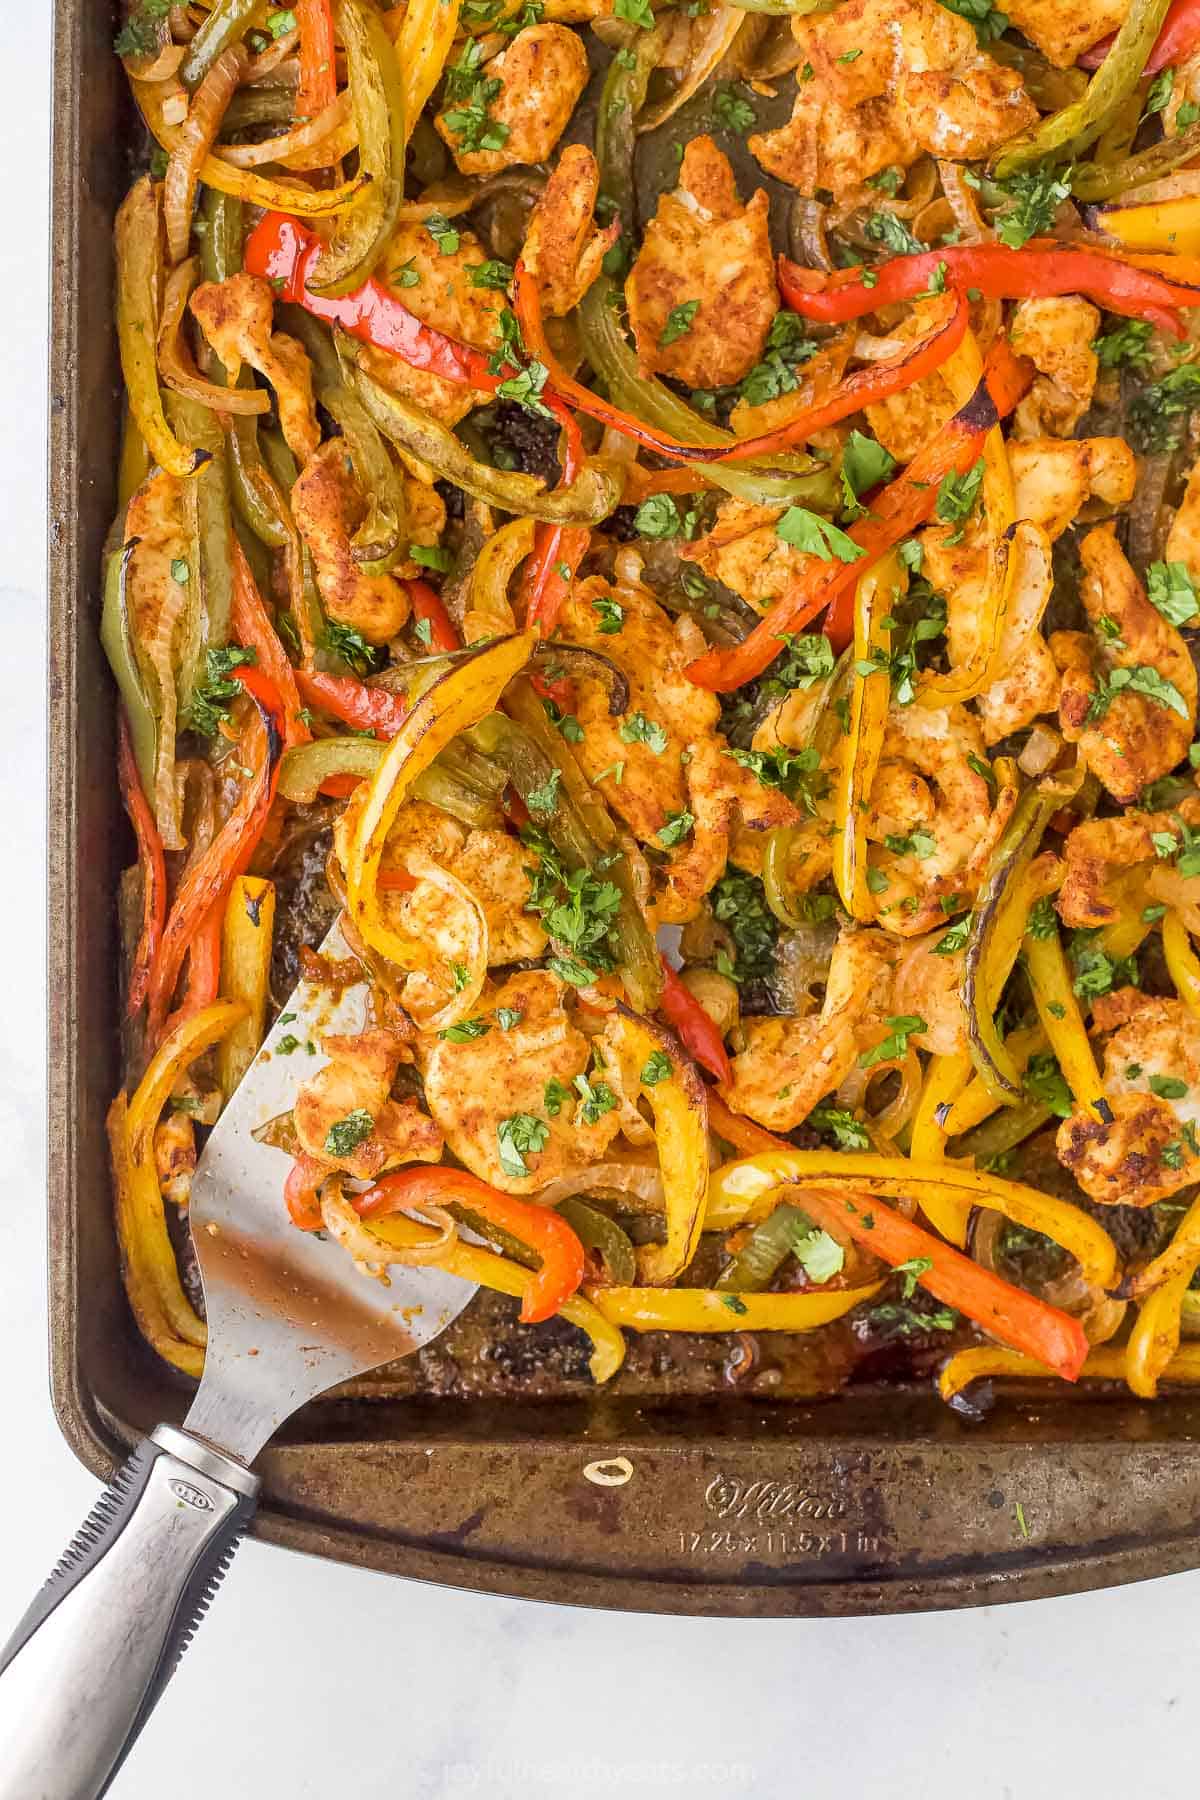 Easy Cast Iron Skillet Chicken Fajitas - Healthy and Cheap